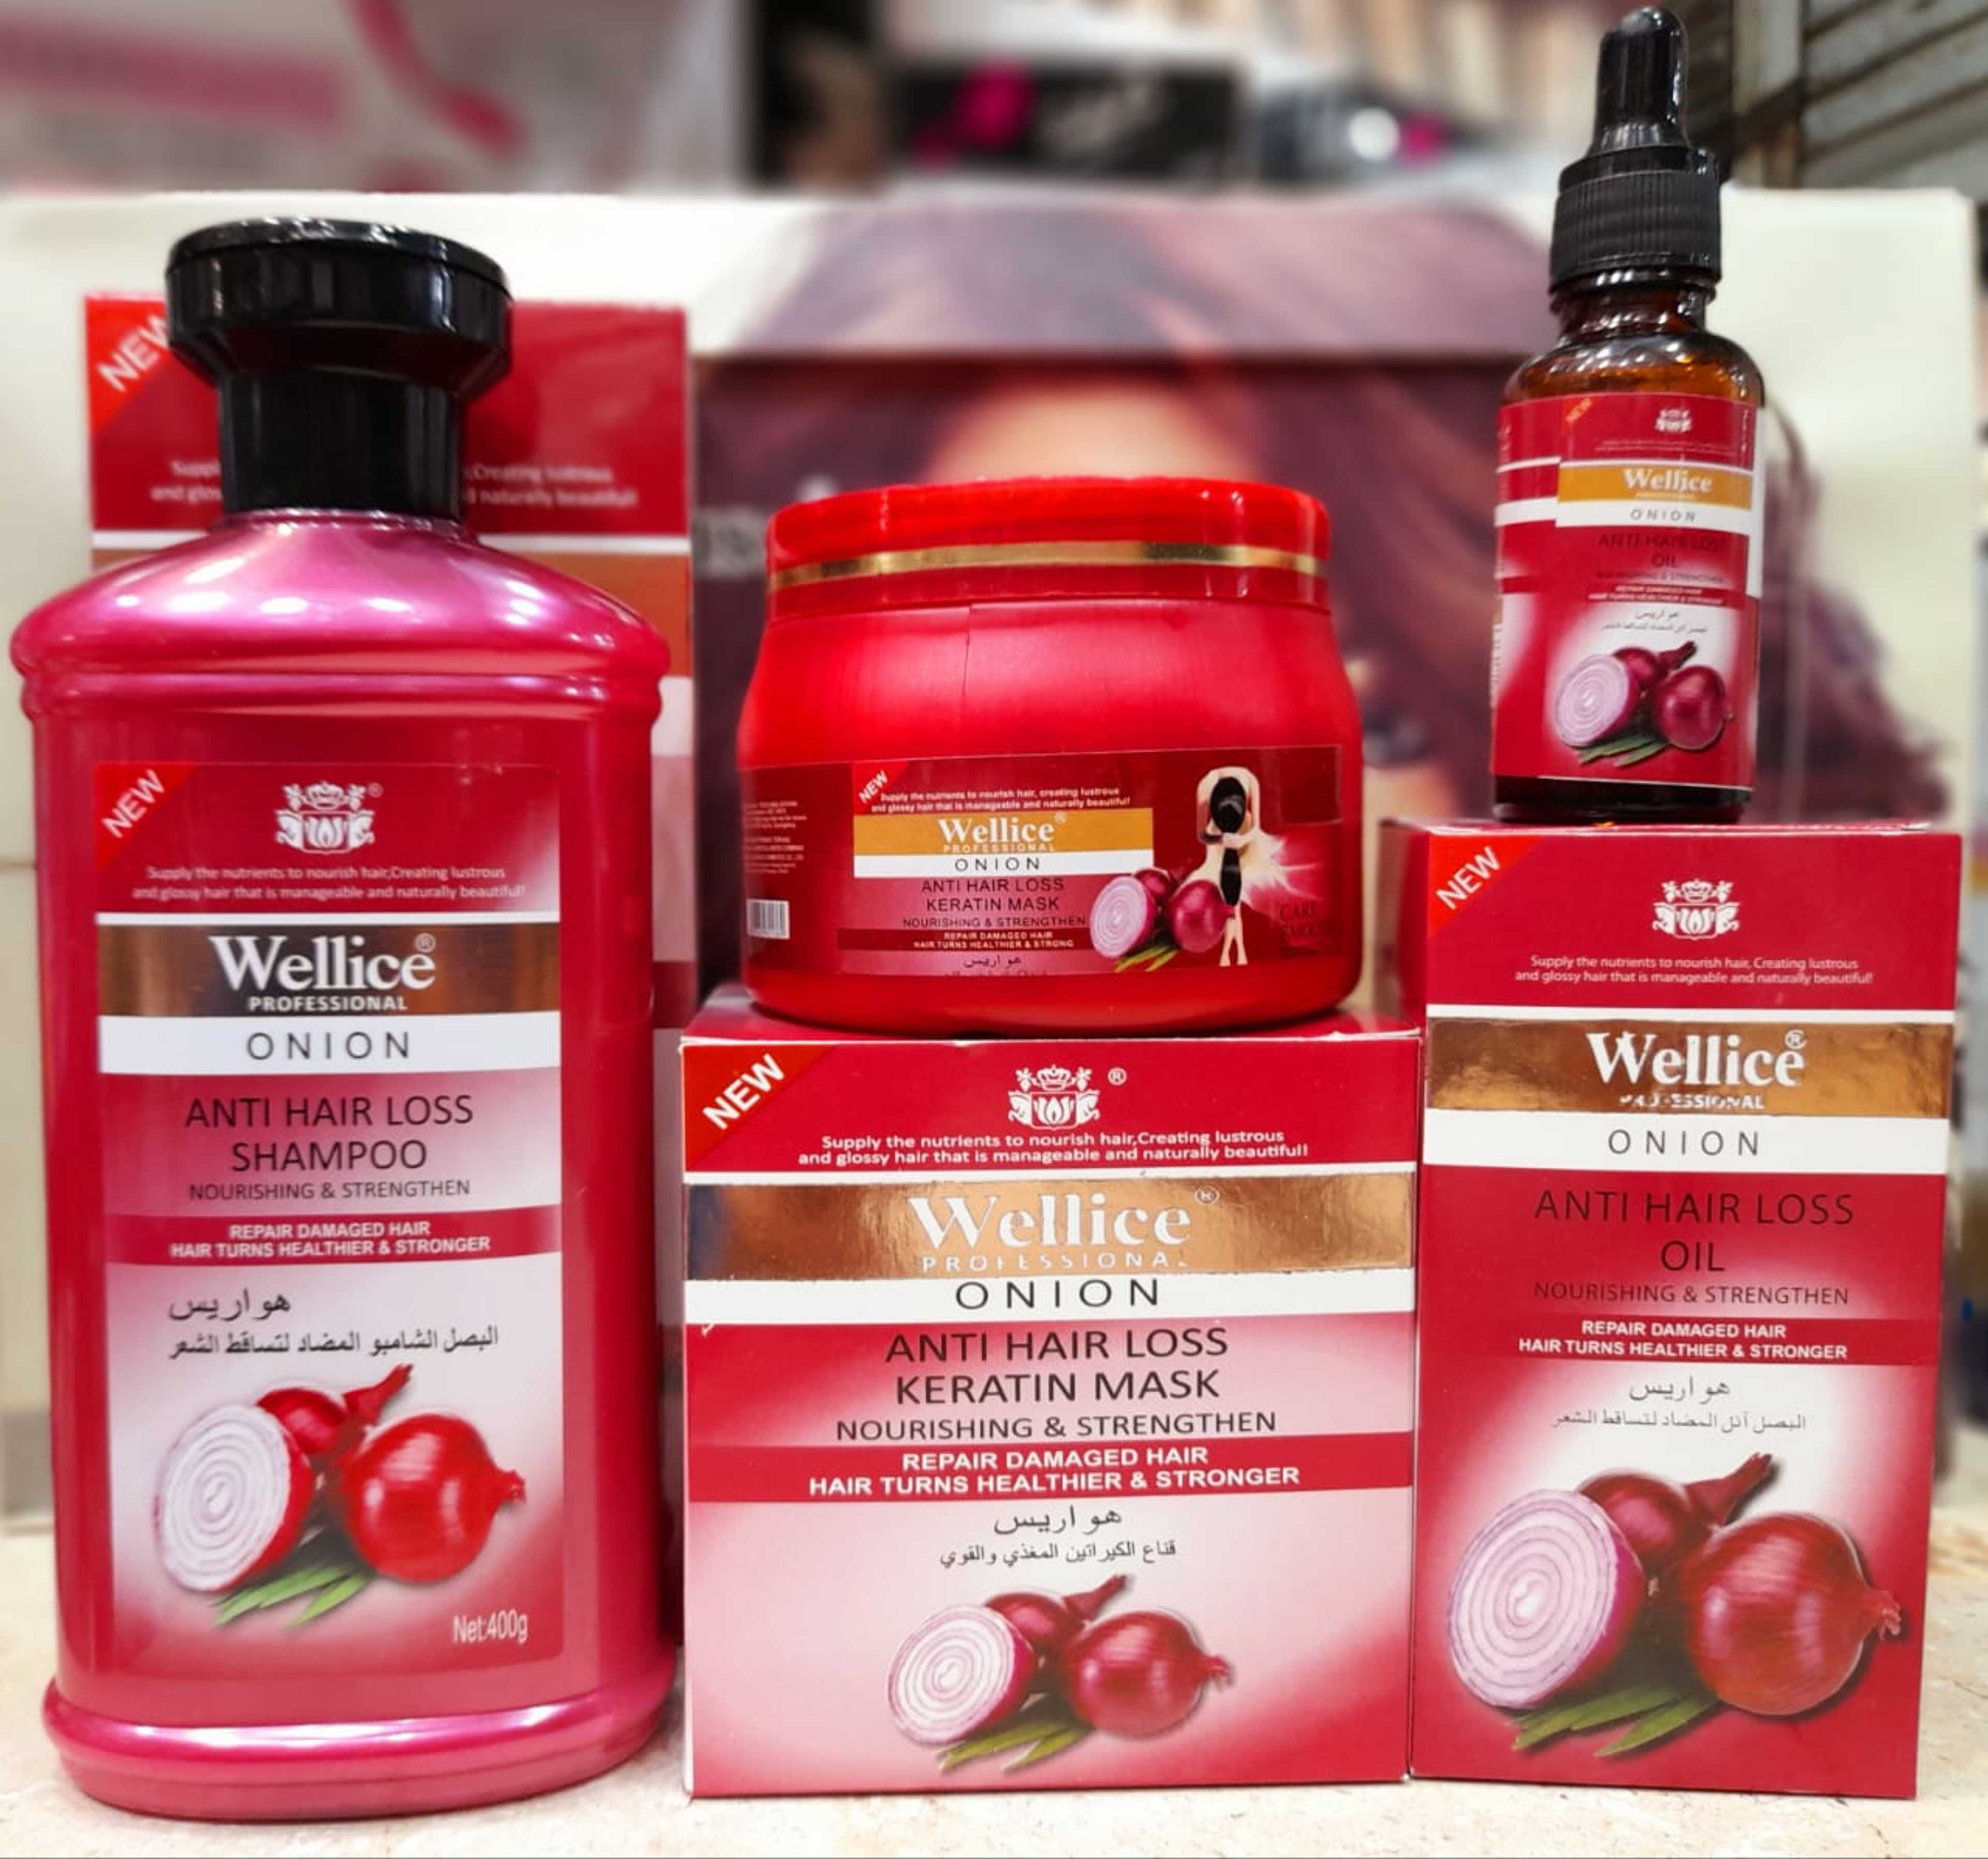 Wellice Deal Hair Loss Solution with Onion Extract (Shampoo, Oil & Mask)